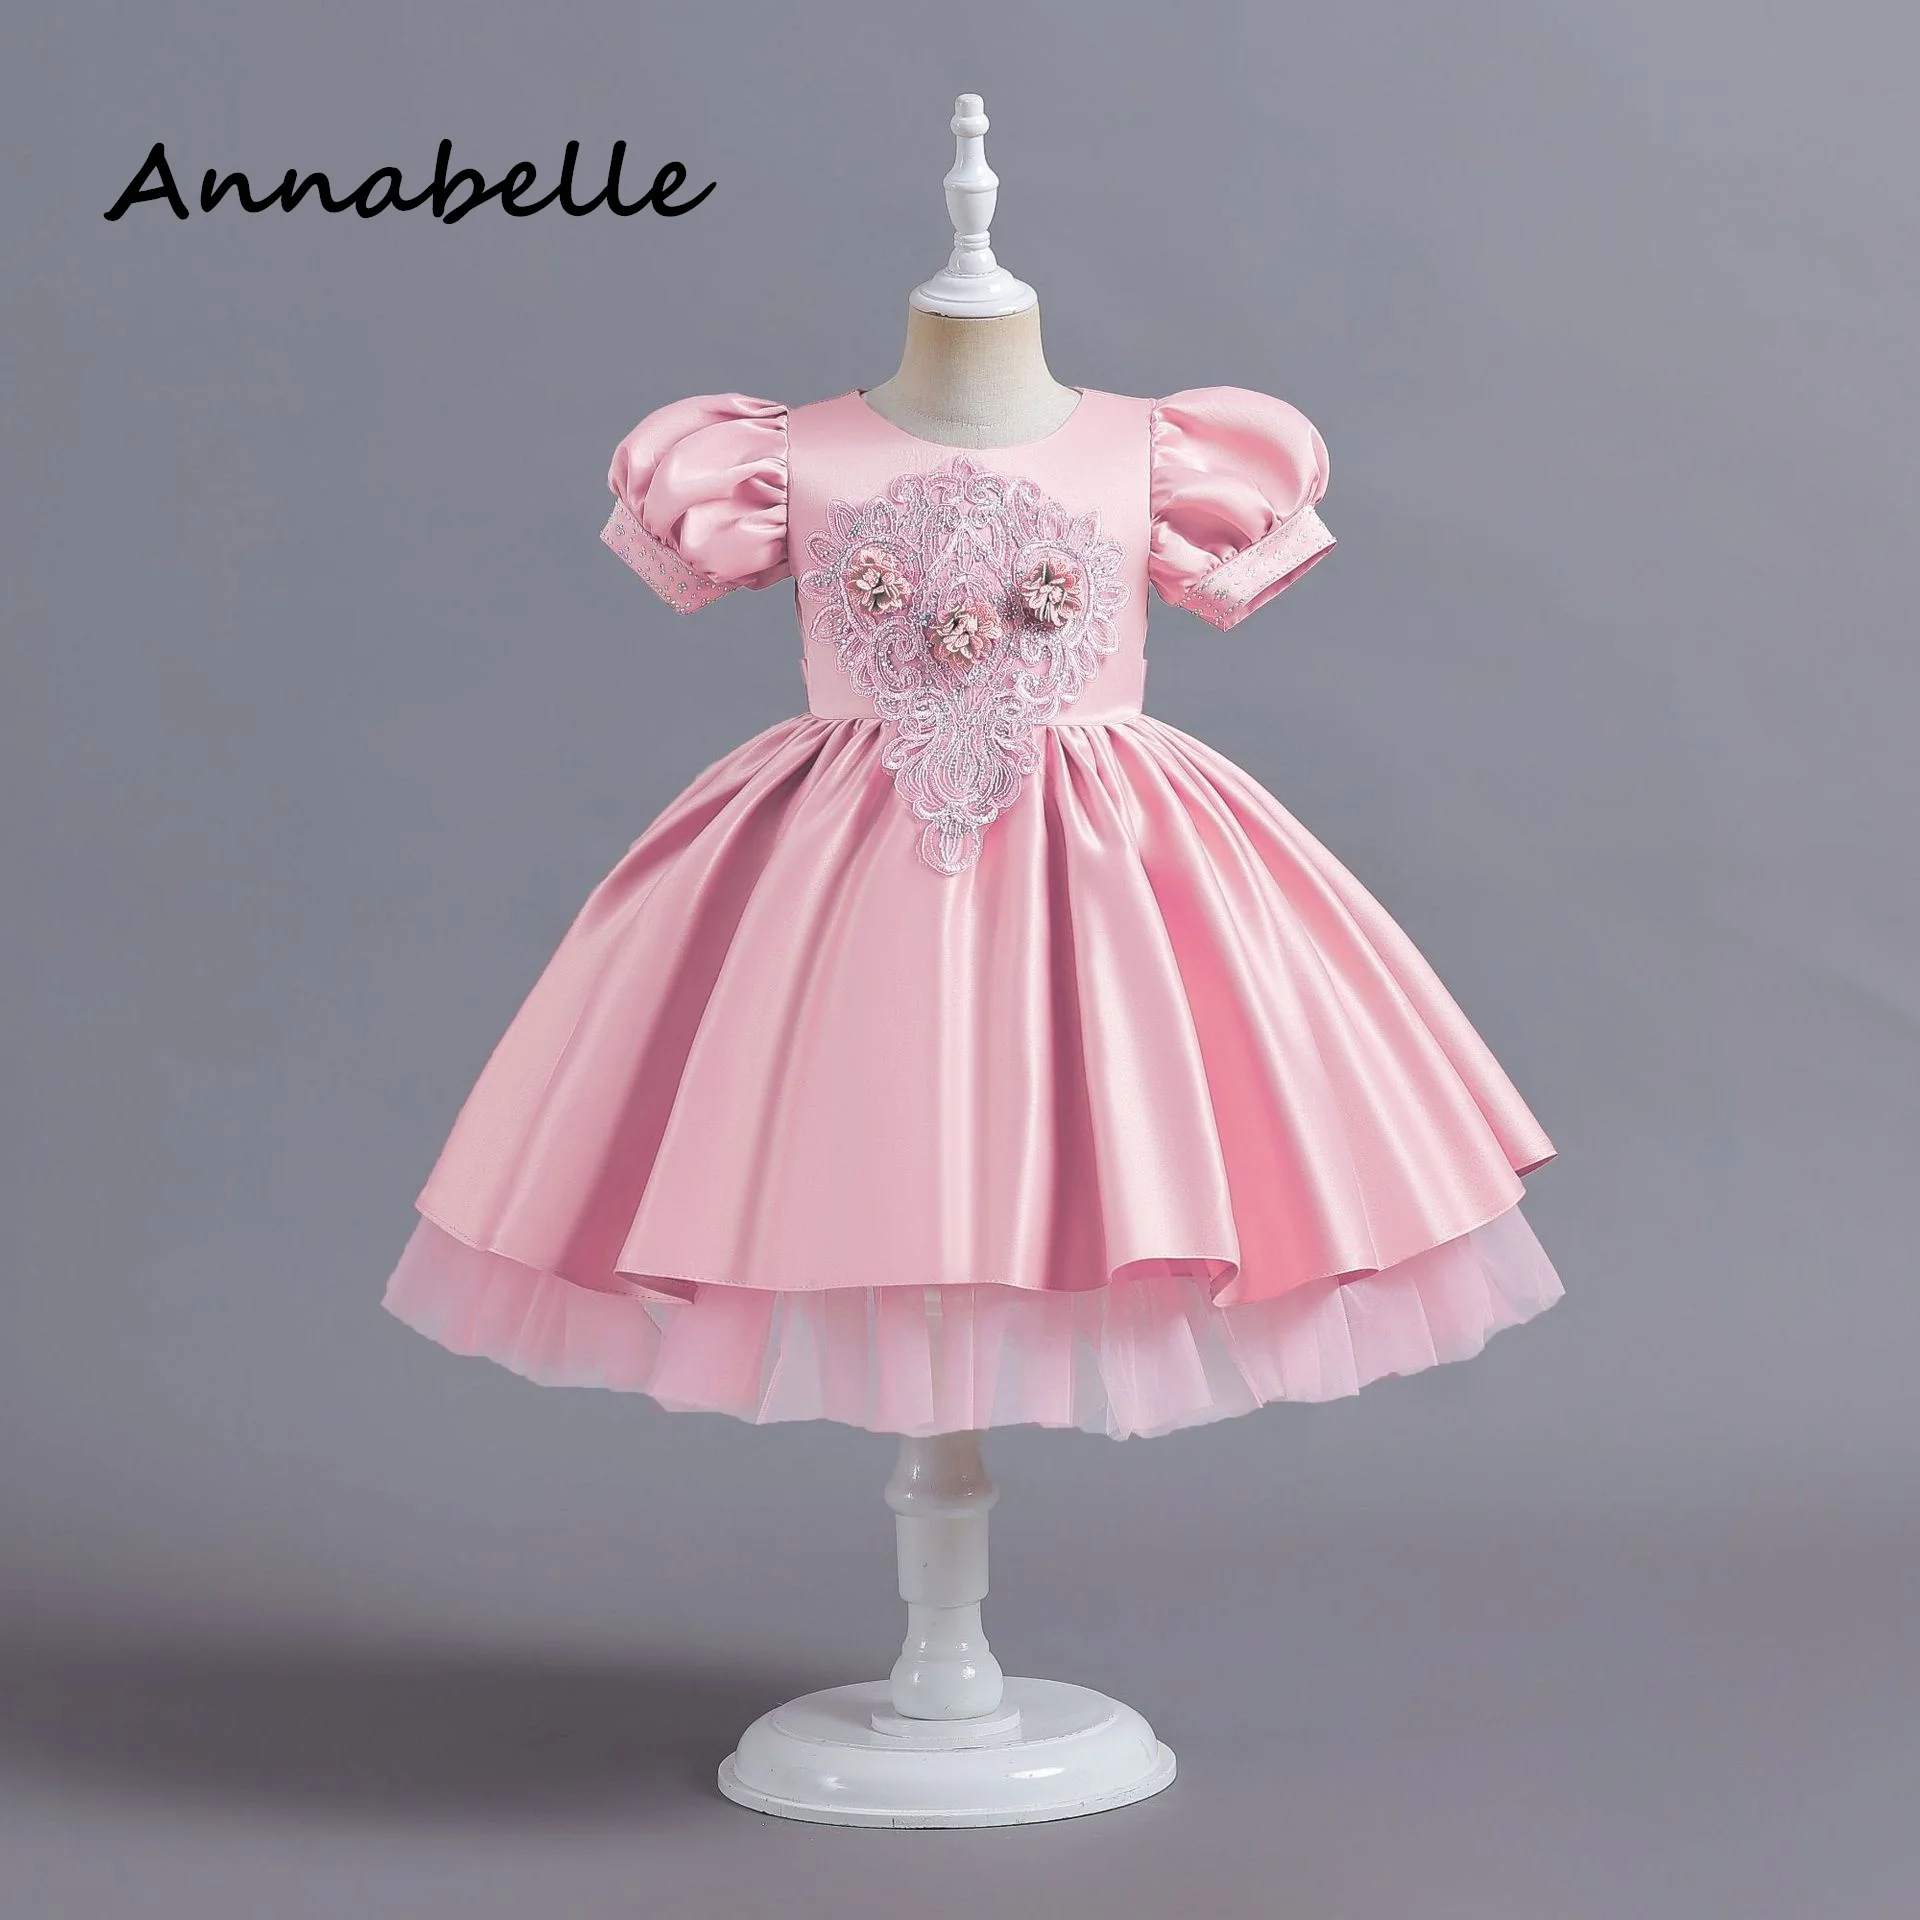 

Annabelle Flower Girl Princess Dress Baby Girl Ceremony Birthday Short Sleeved Round Neck For Wedding Party Bridesmaid Bow Dress